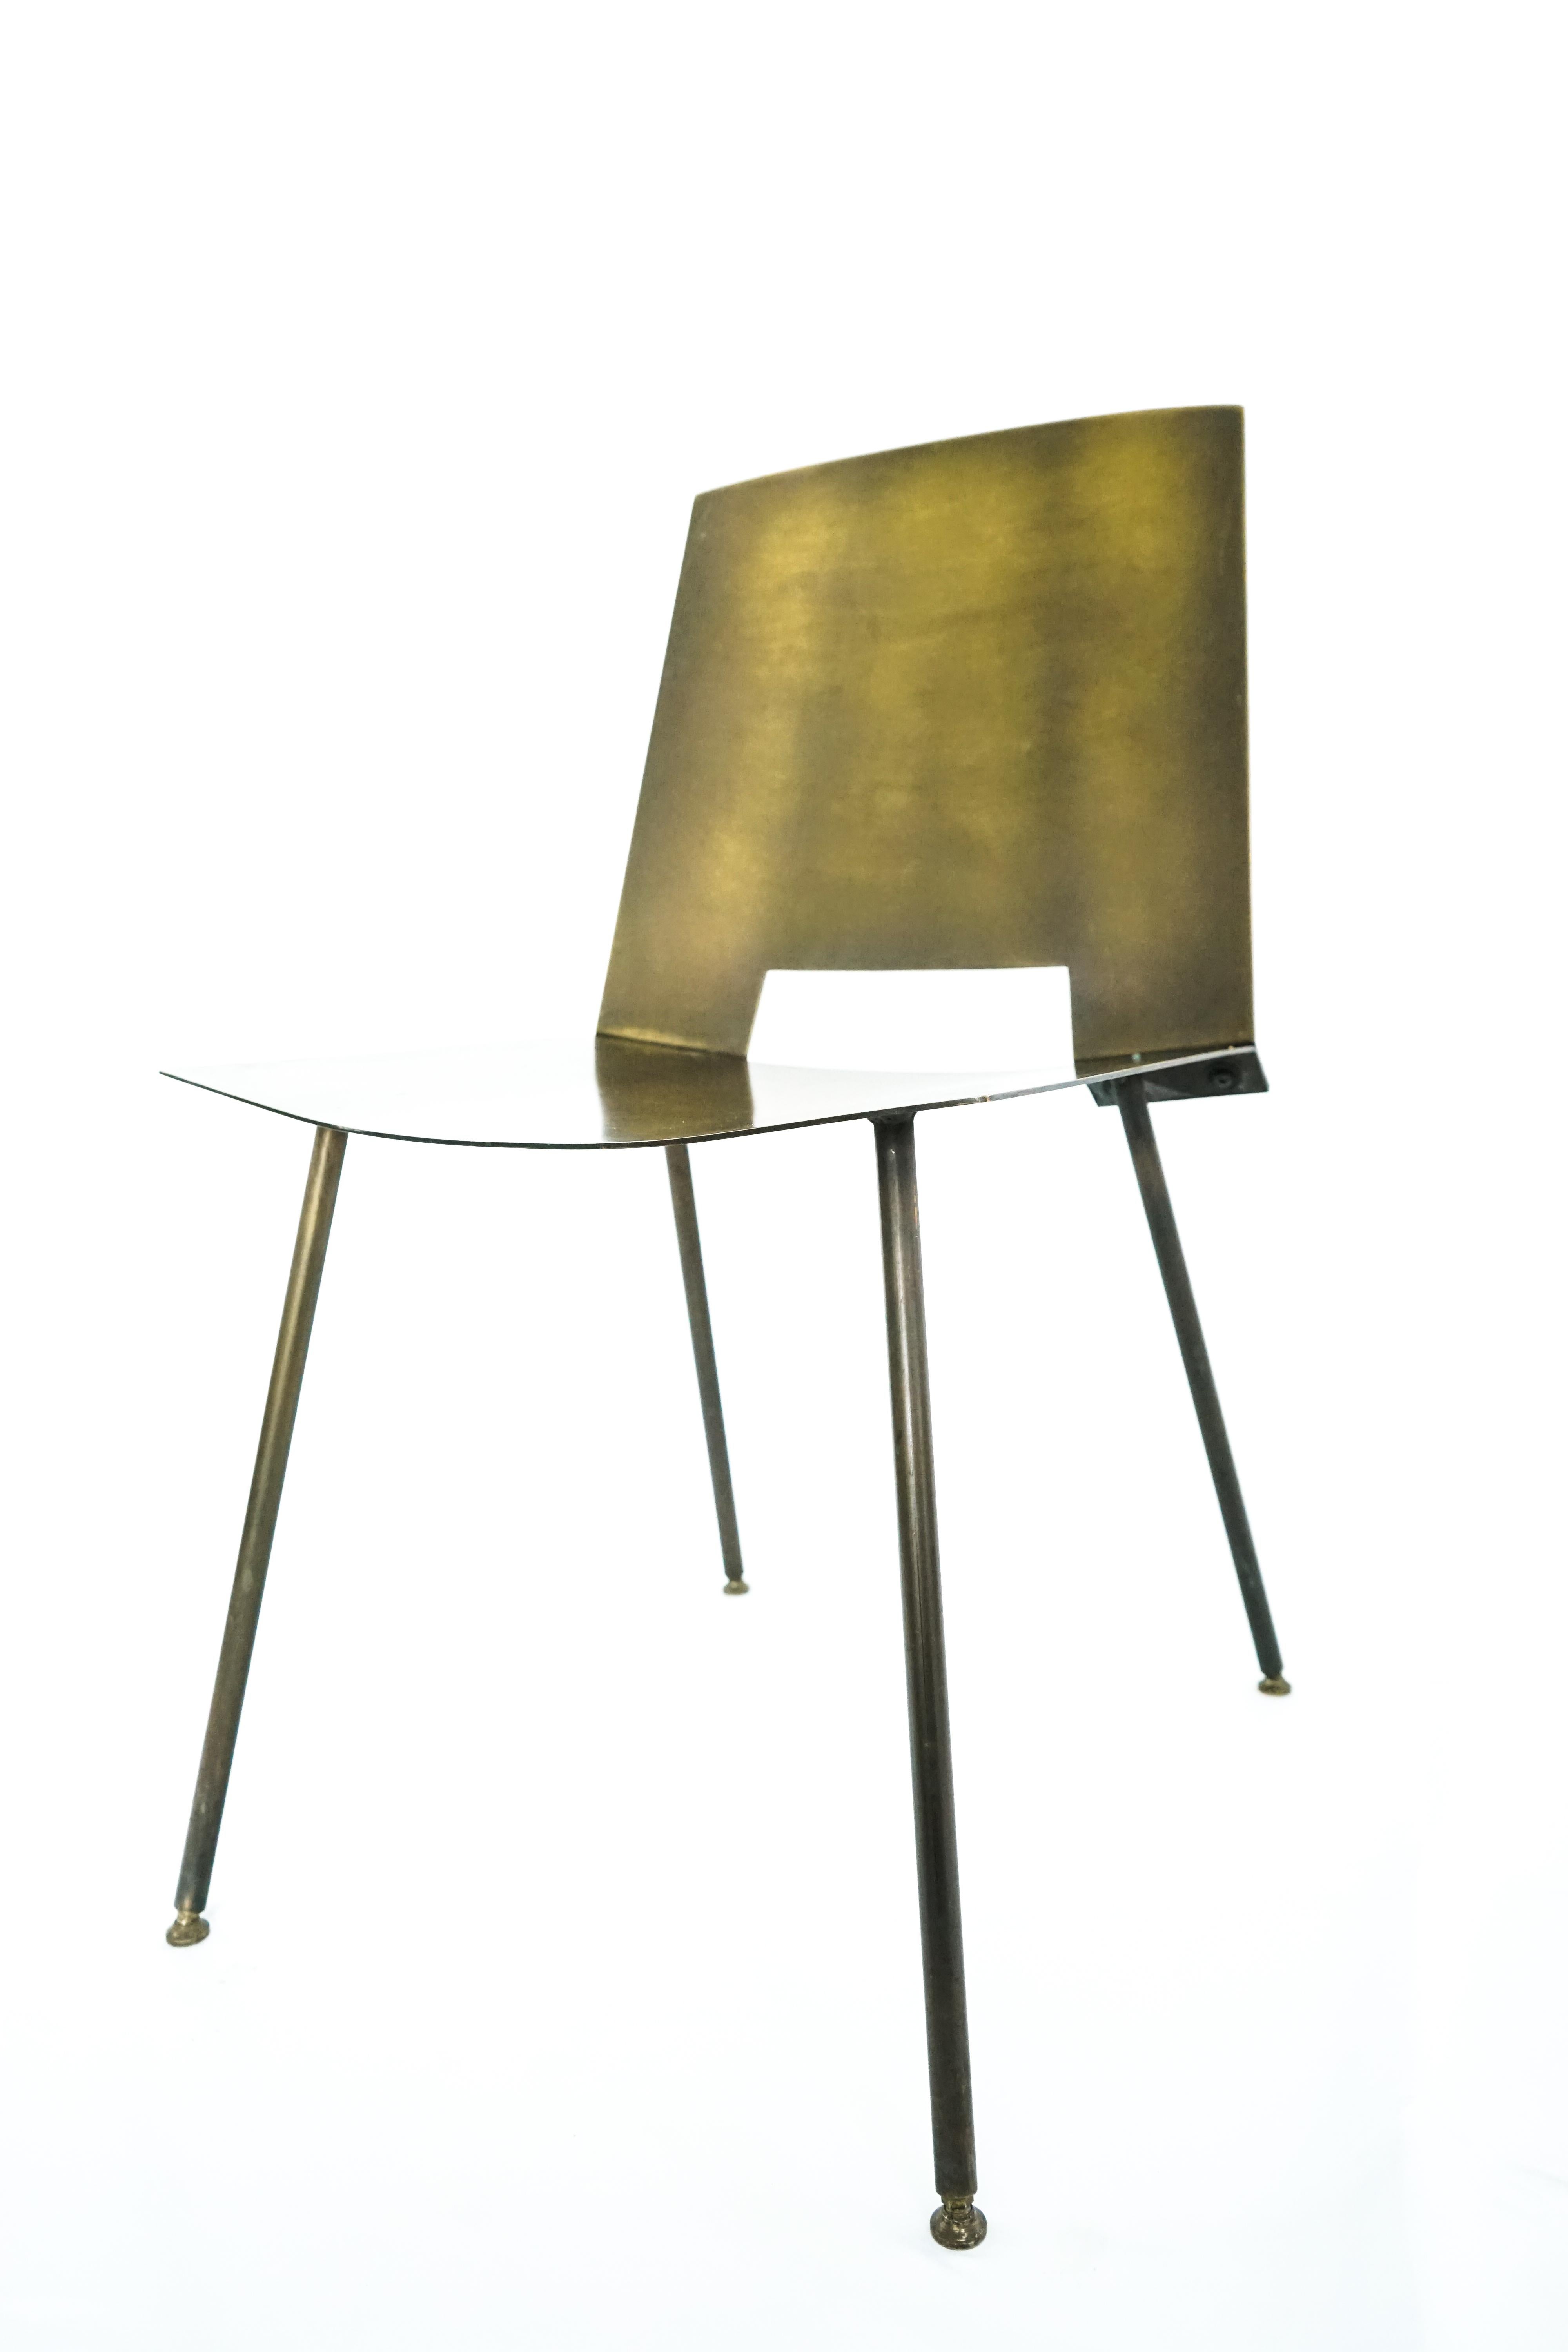 21st century, contemporary, modern, Bronze Side Chair by Edelman New York
Customizable finish available upon request.
-) Chair height 35.125”
-) Seat height 19.25” 
-) Seat width 19.625” 
-) Back Height 17.75”.